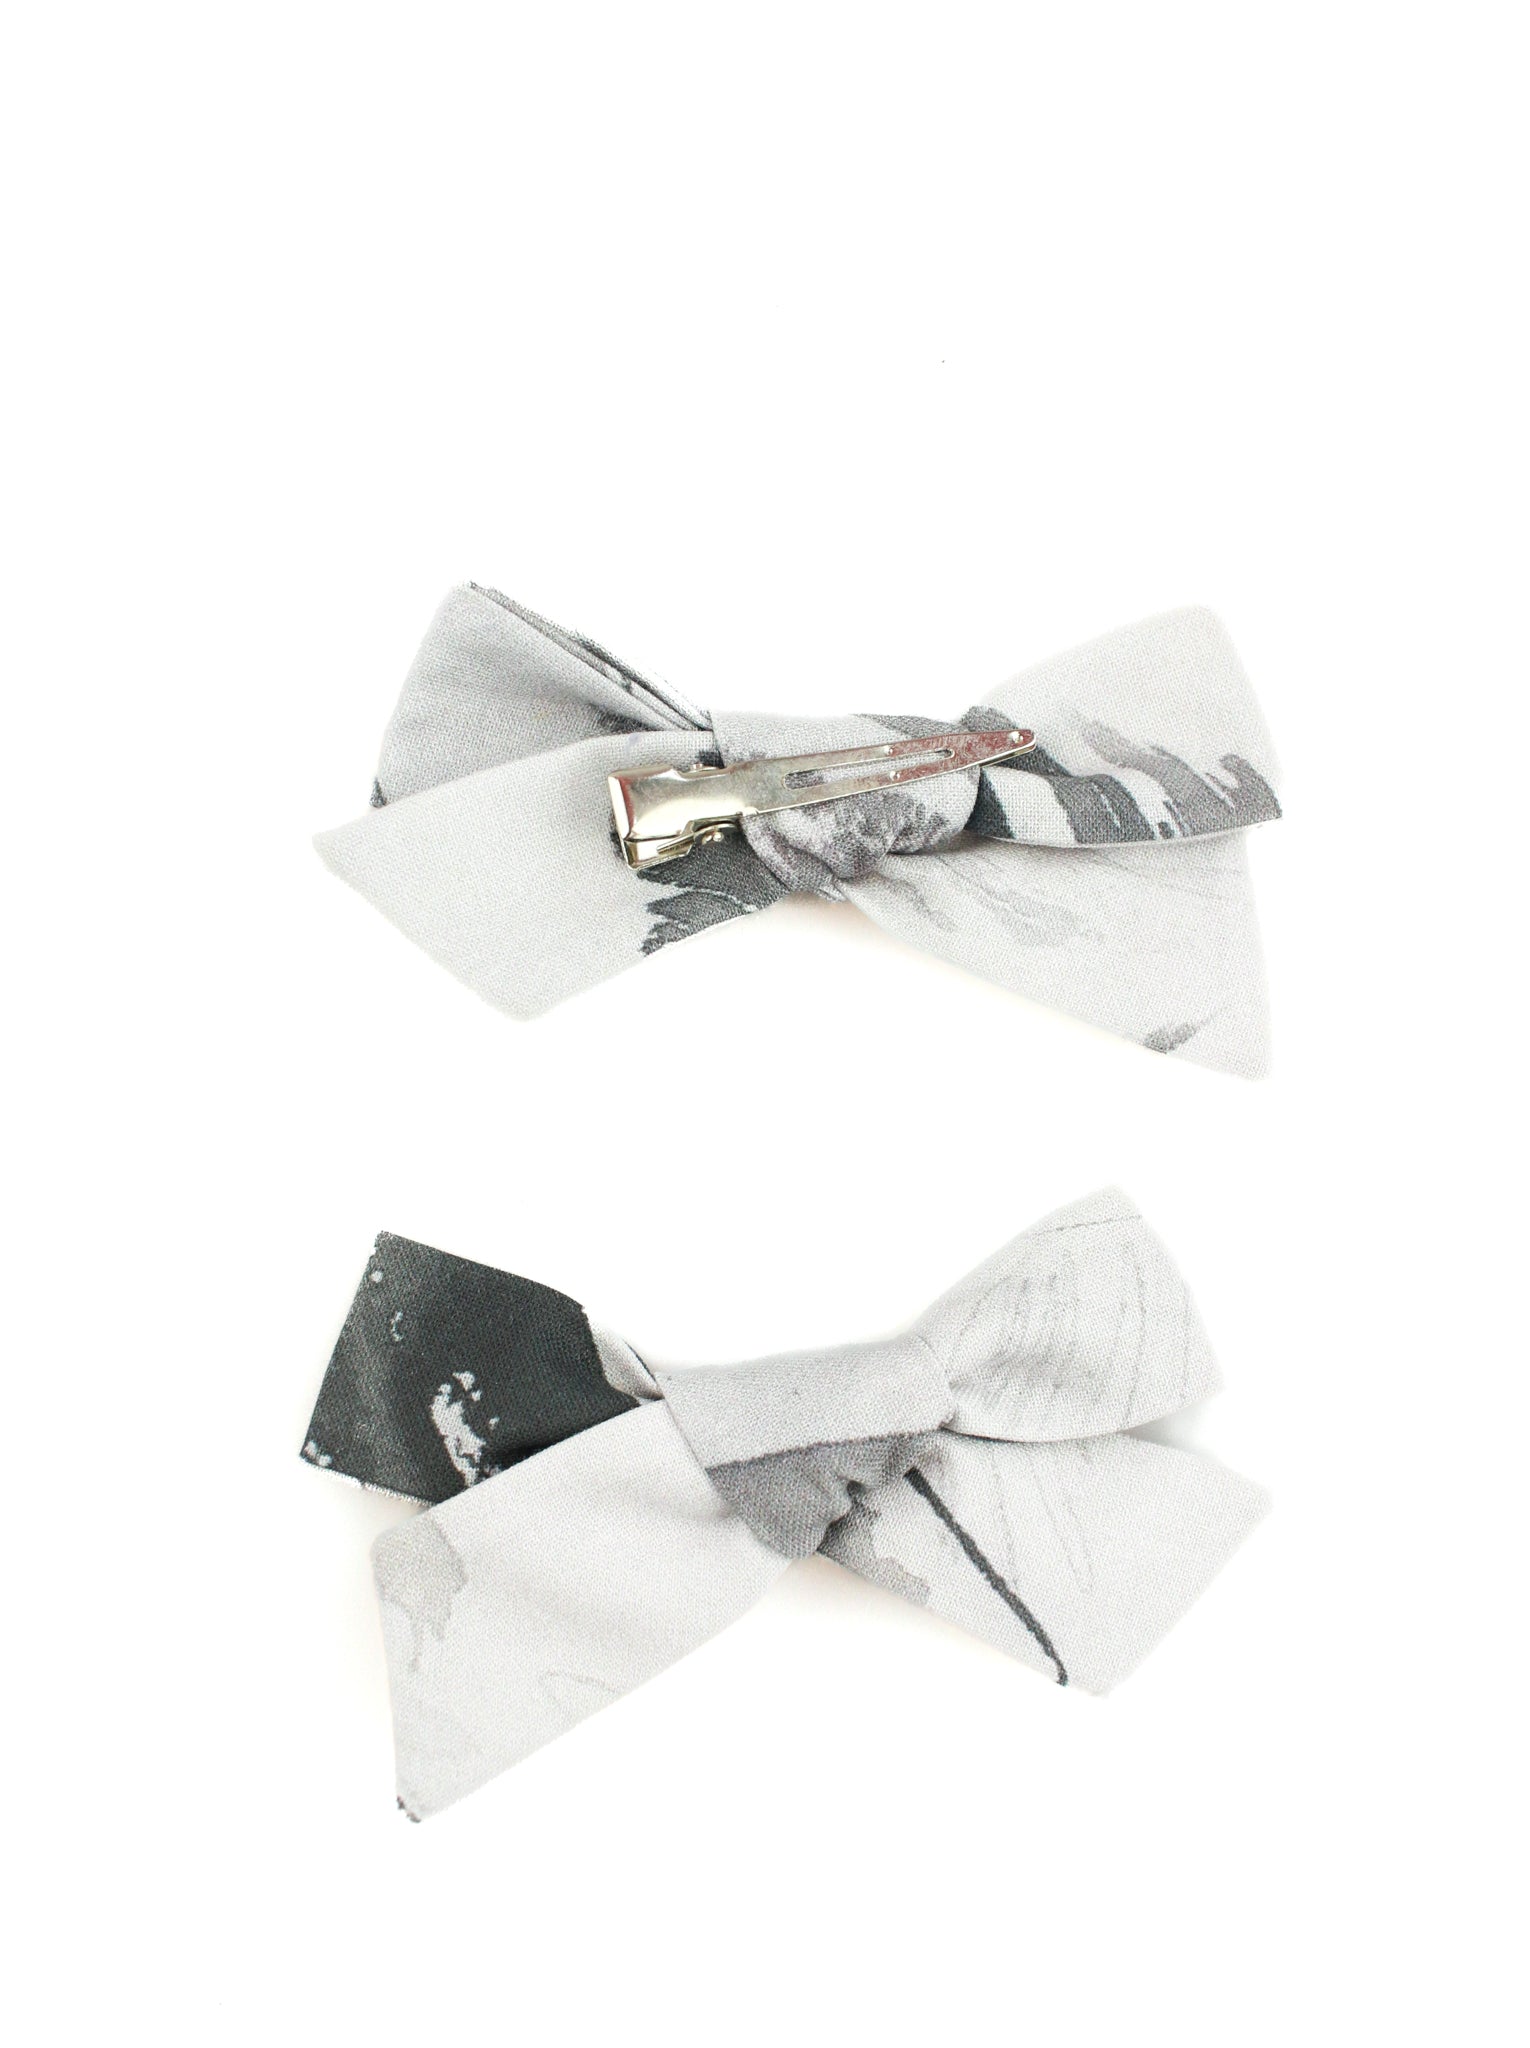 Bow with Clip